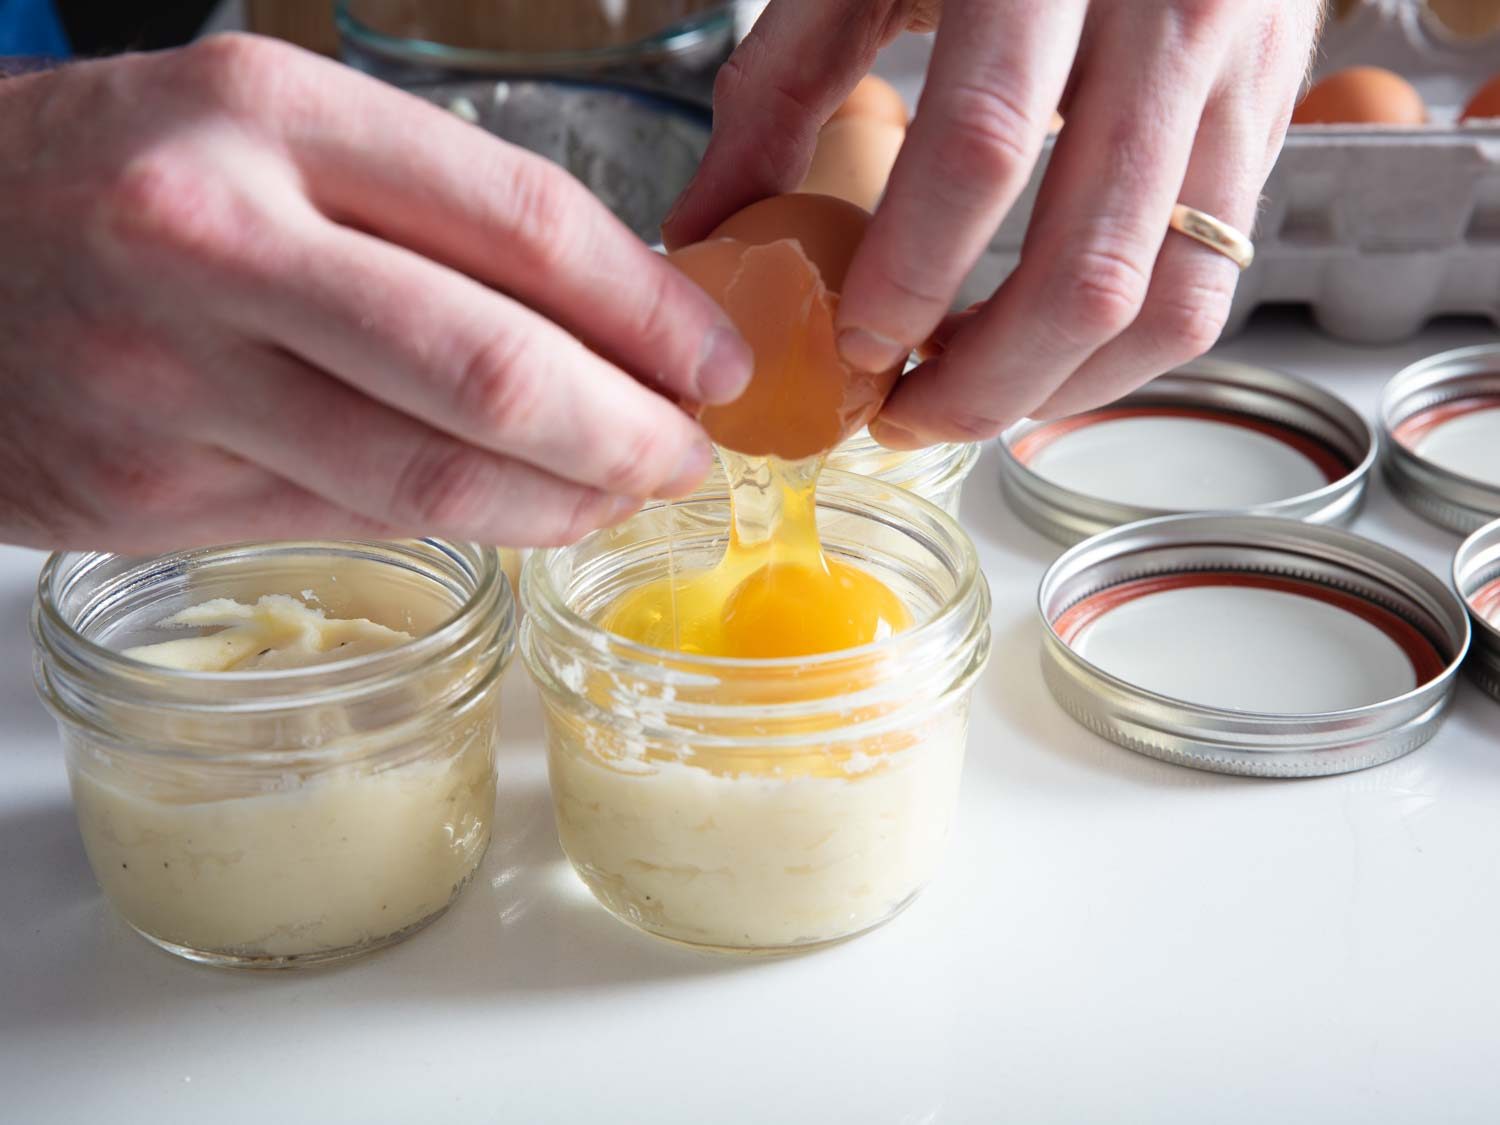 Cracking an egg into a Mason jar with mashed potatoes.